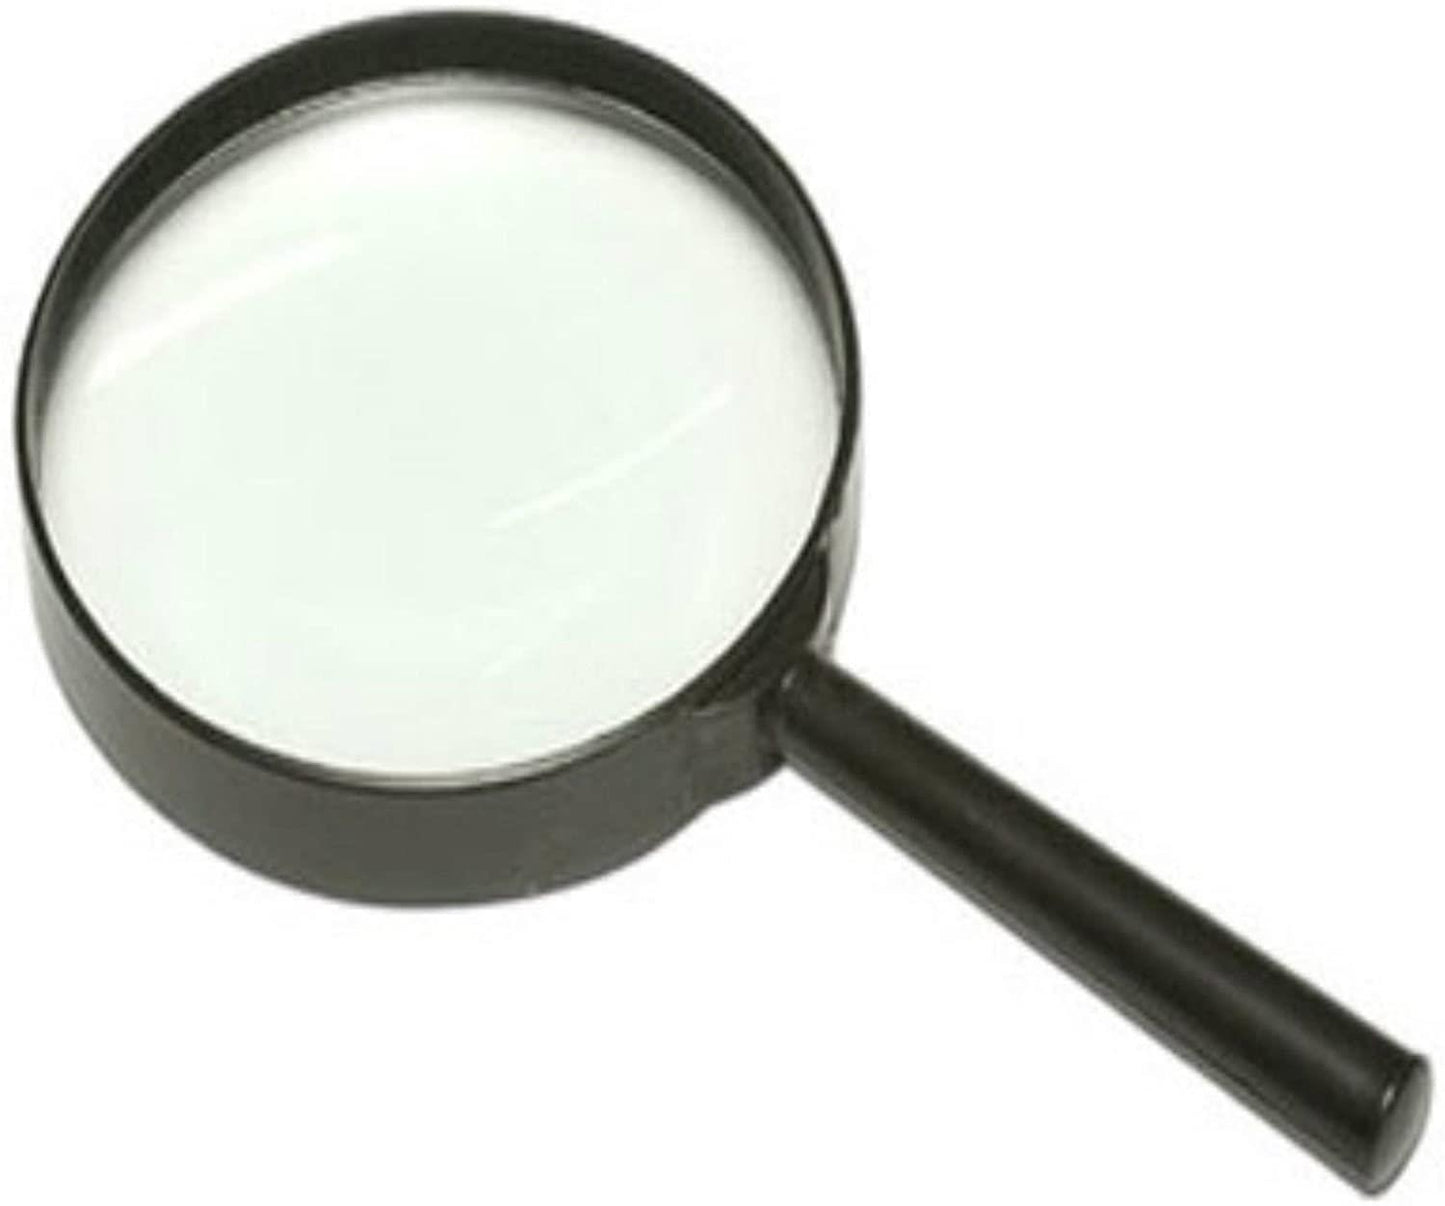 Kinght 100mm Magnifying Glass- 916074 Watch Tool